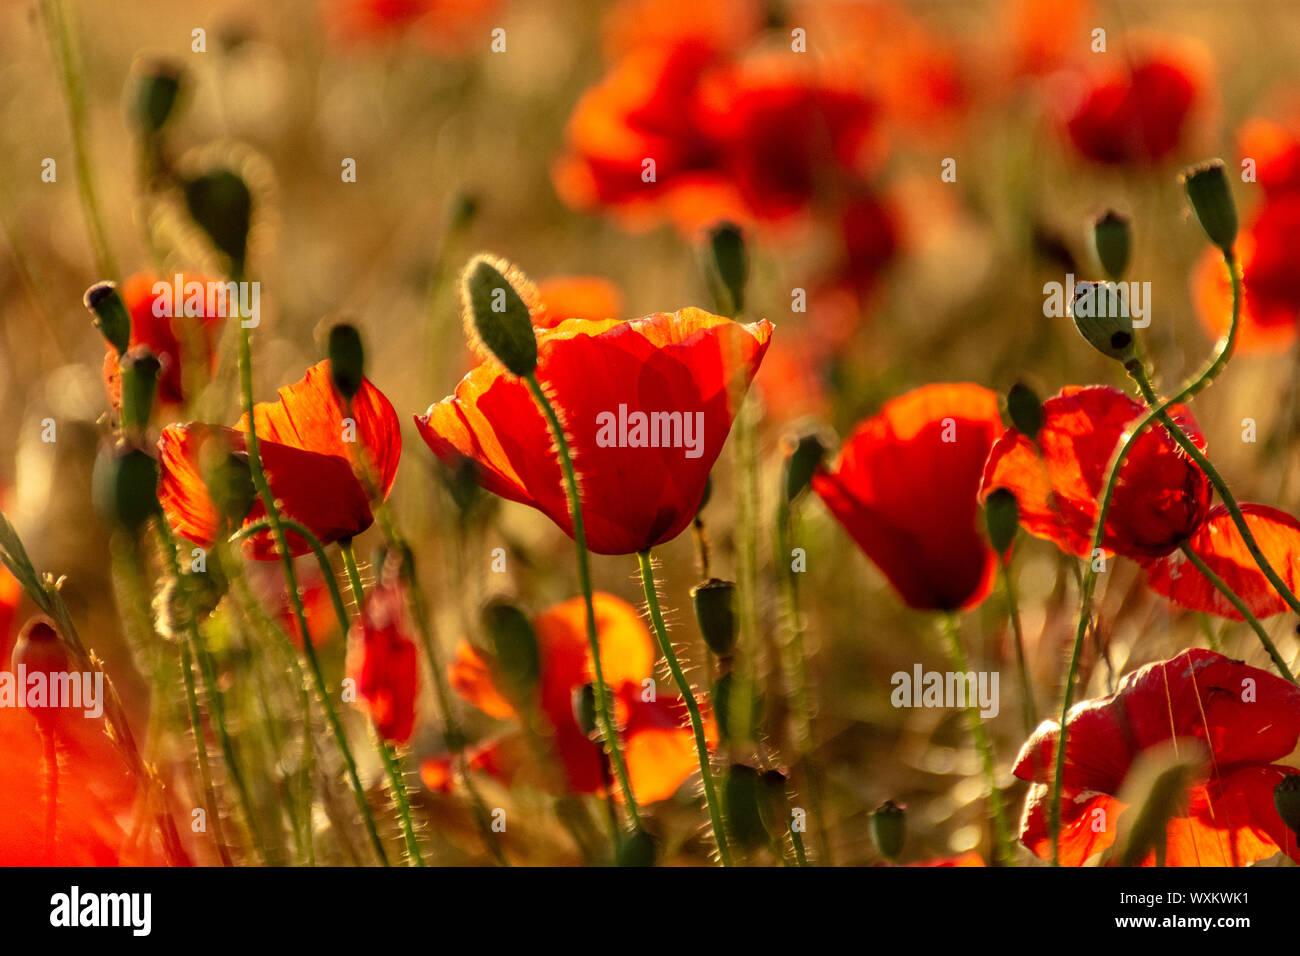 Red poppy, poppies, into a wheat field at sunset. Spikes of wheat ...